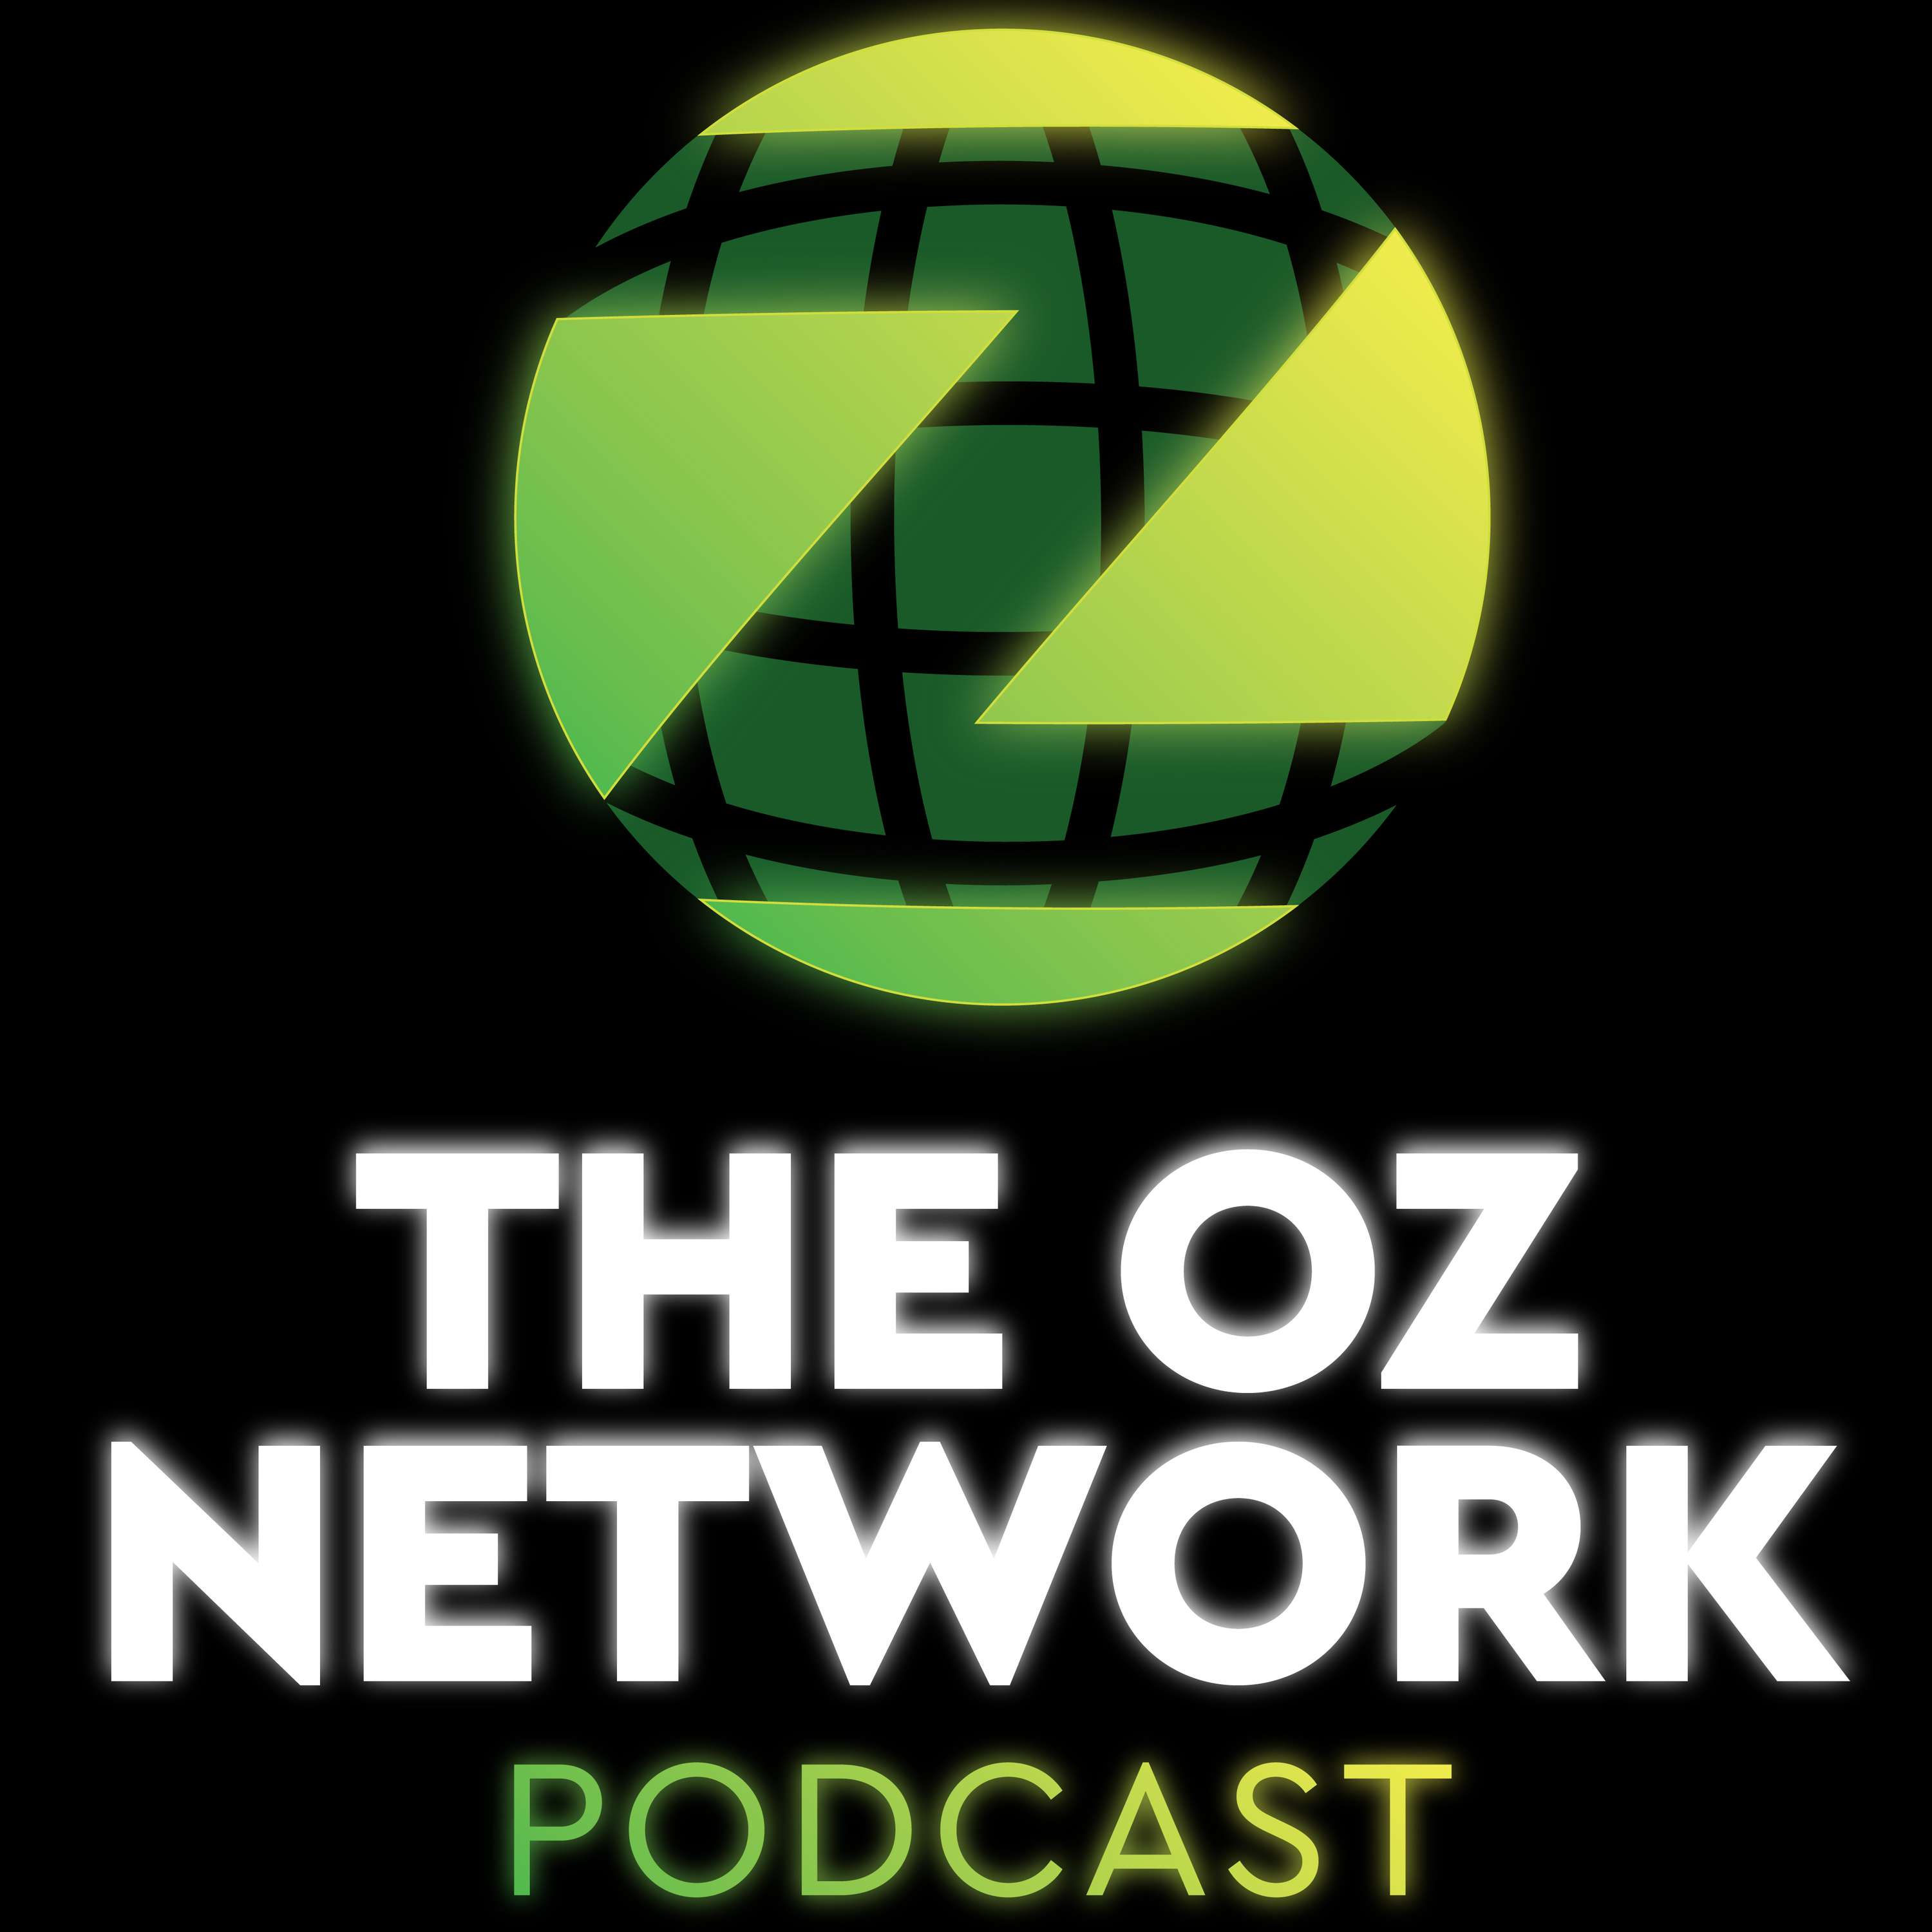 The Best Of 2022 - The Oz Network